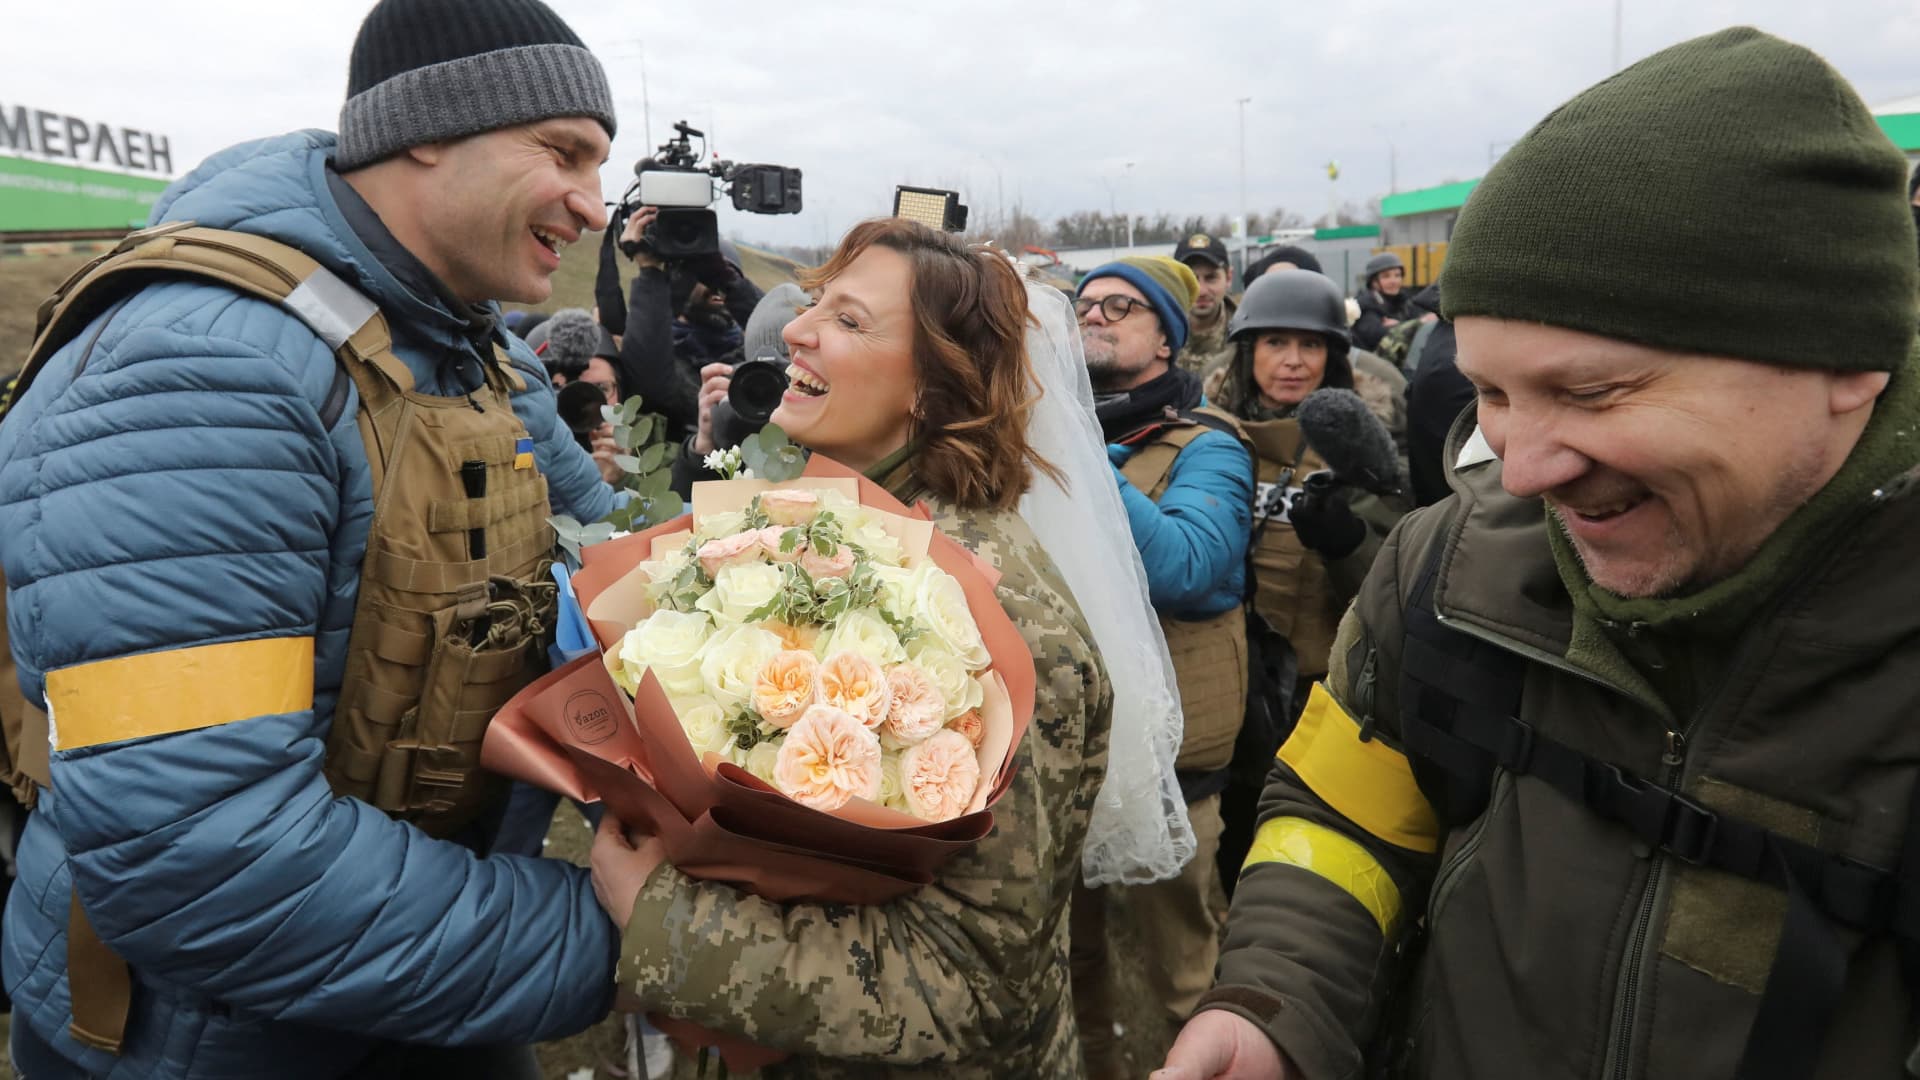 Mayor of Kyiv Vitali Klitschko congratulates members of the Ukrainian Territorial Defence Forces Lesia Ivashchenko and Valerii Fylymonov at their wedding during Ukraine-Russia conflict, at a checkpoint in Kyiv, Ukraine March 6, 2022.